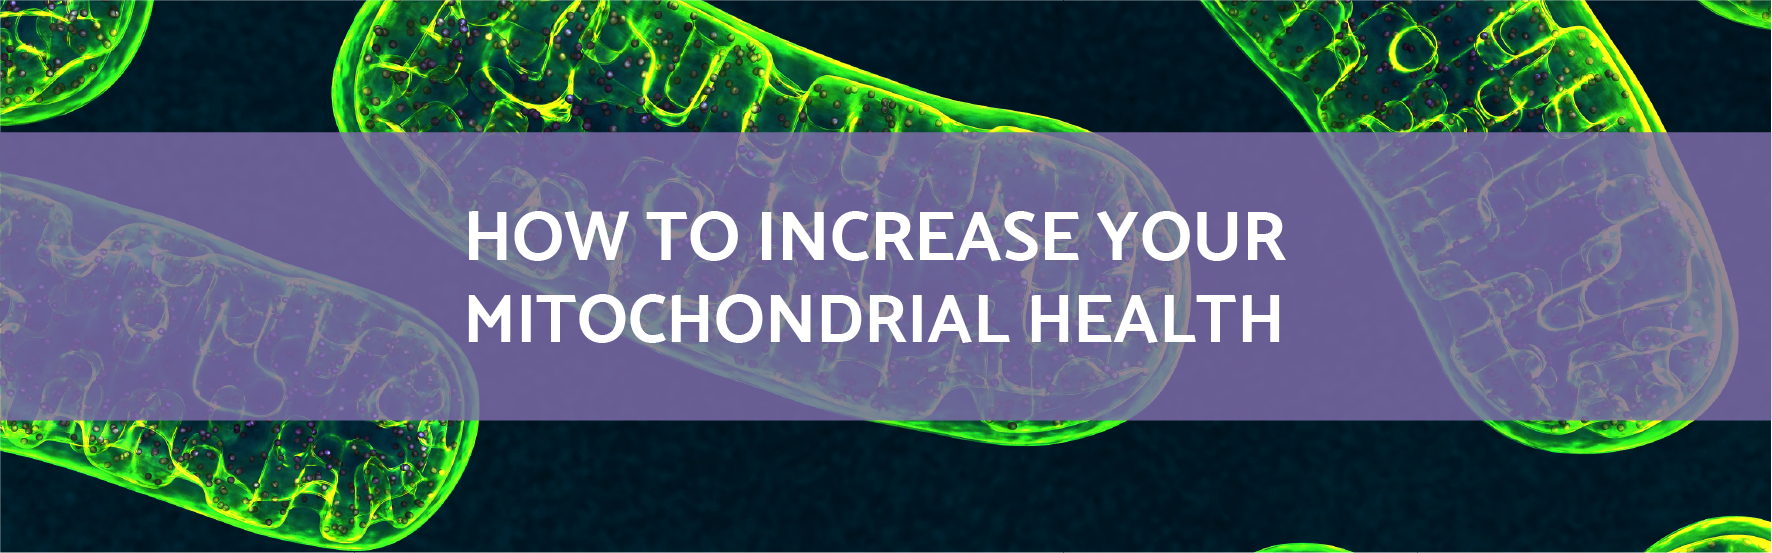 How To Increase Your Mitochondrial Health | Articles | OPTMZ | 